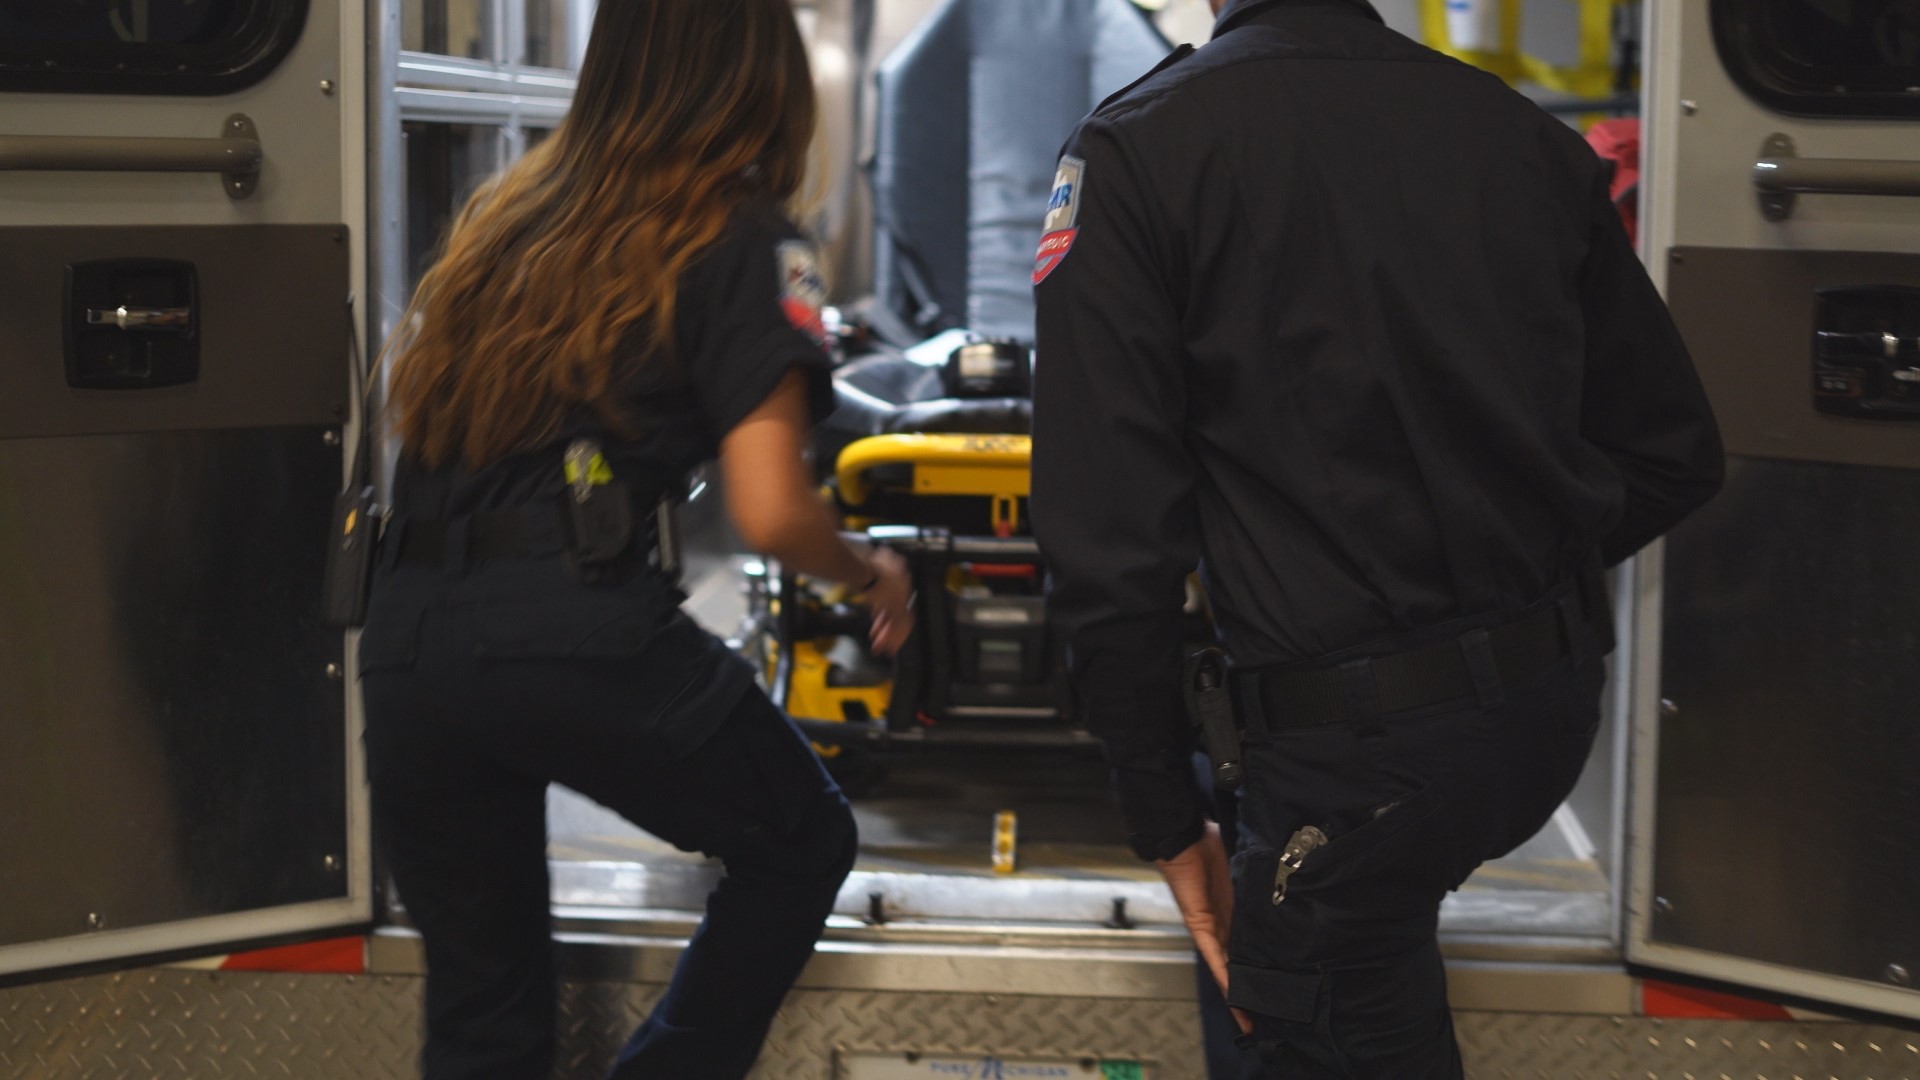 This week, as we mark National EMS Week, we celebrate those working in this profession and offering care to people when they need it most.